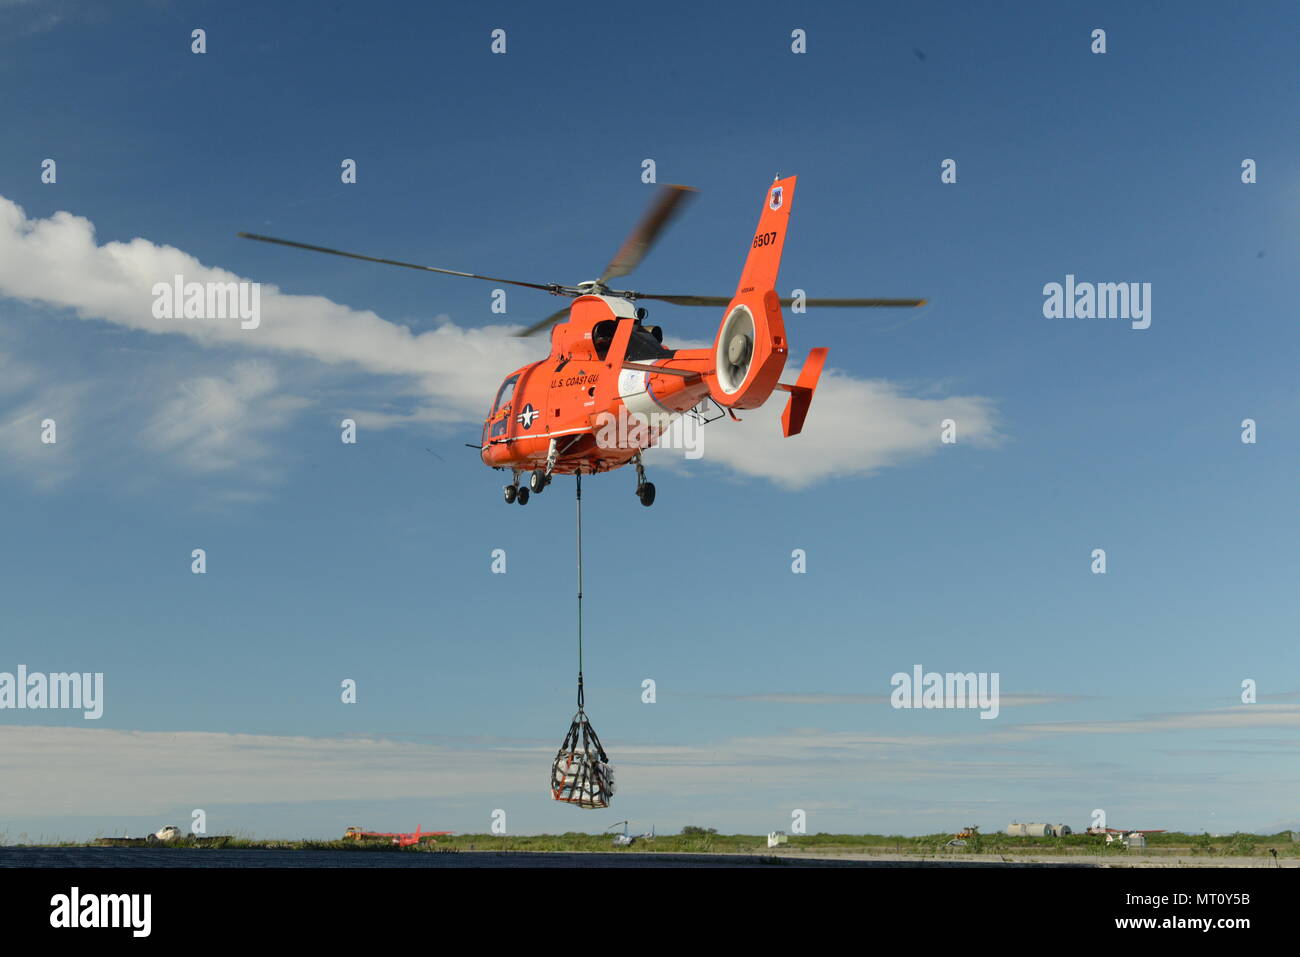 A Coast Guard Air Station Kodiak MH-65 helicopter aircrew, currently deployed on the Coast Guard Cutter Sherman, conducts sling-load operations at Forward Operating Location Kotzebue, July 20, 2017. The aircrew and helicopter are deployed on the Sherman in support of Operation Arctic Shield. U.S. Coast Guard photo by Lt. Brian Dykens. Stock Photo